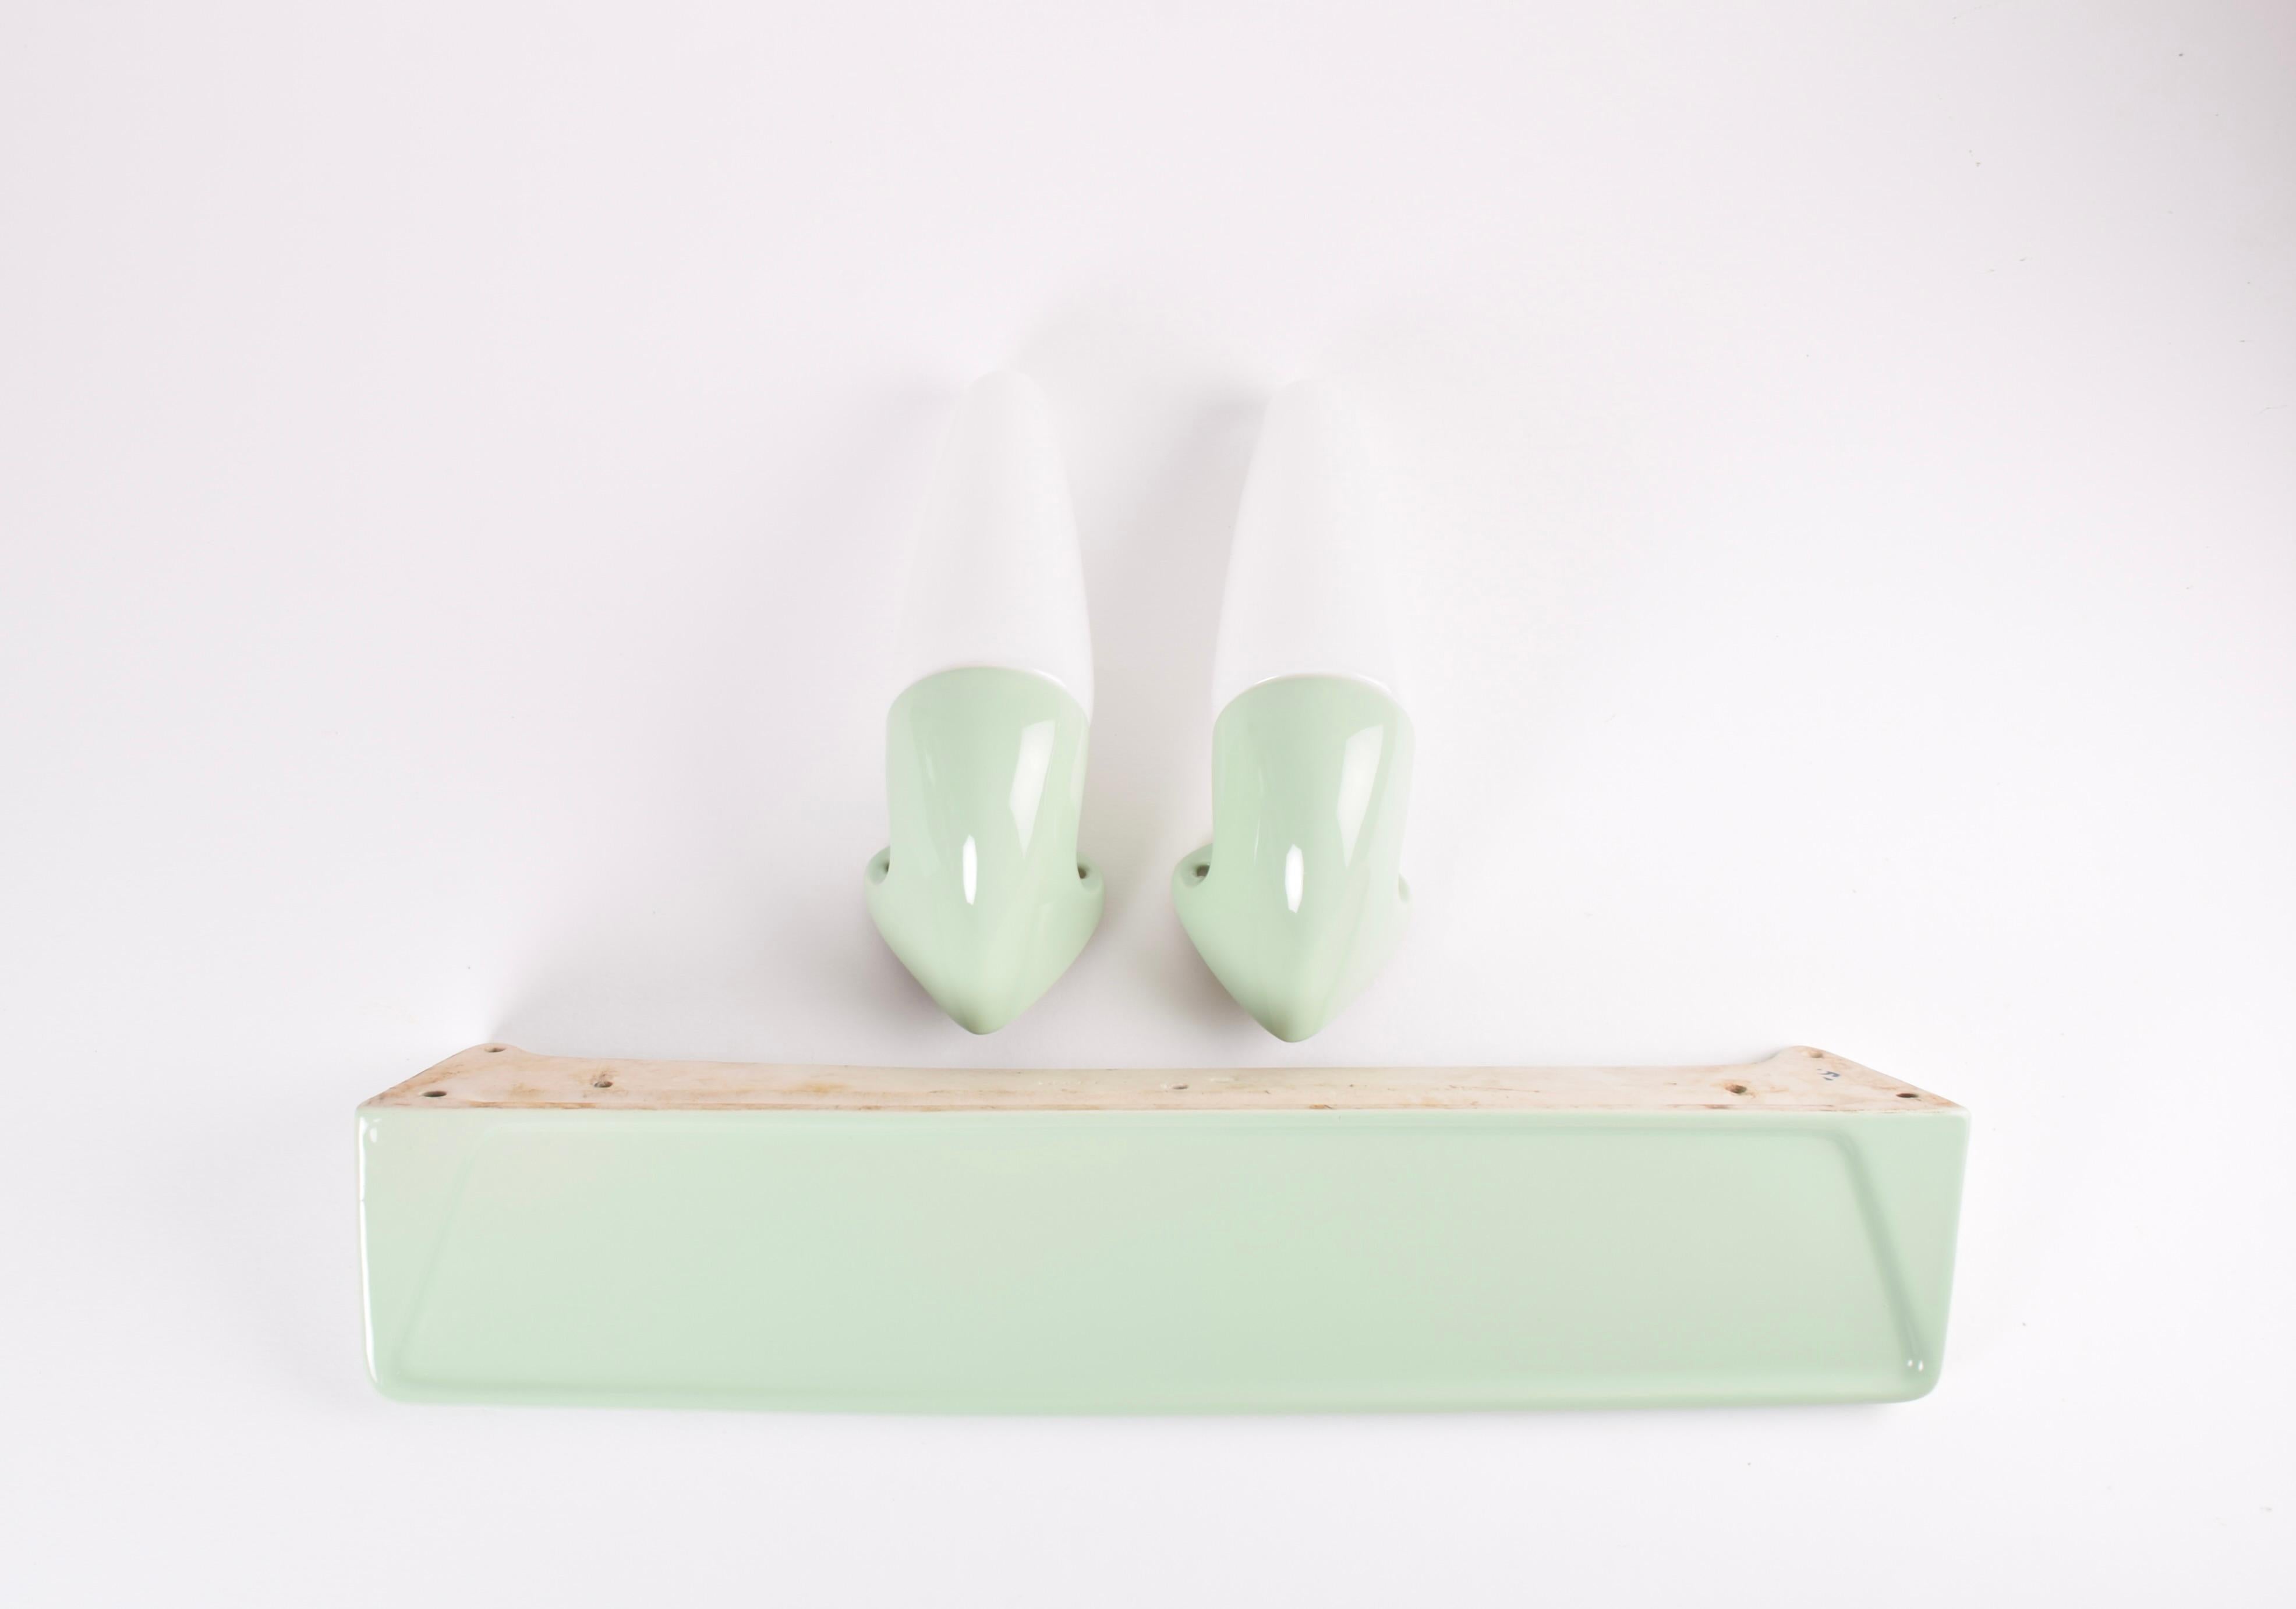 Set of two original vintage wall sconces and a matching shelf from Ifö, Sweden, made circa 1950s to 1960s. They come in the more rare to find pale green color version. The glass screens are made from white opaline glass. Perfect for the